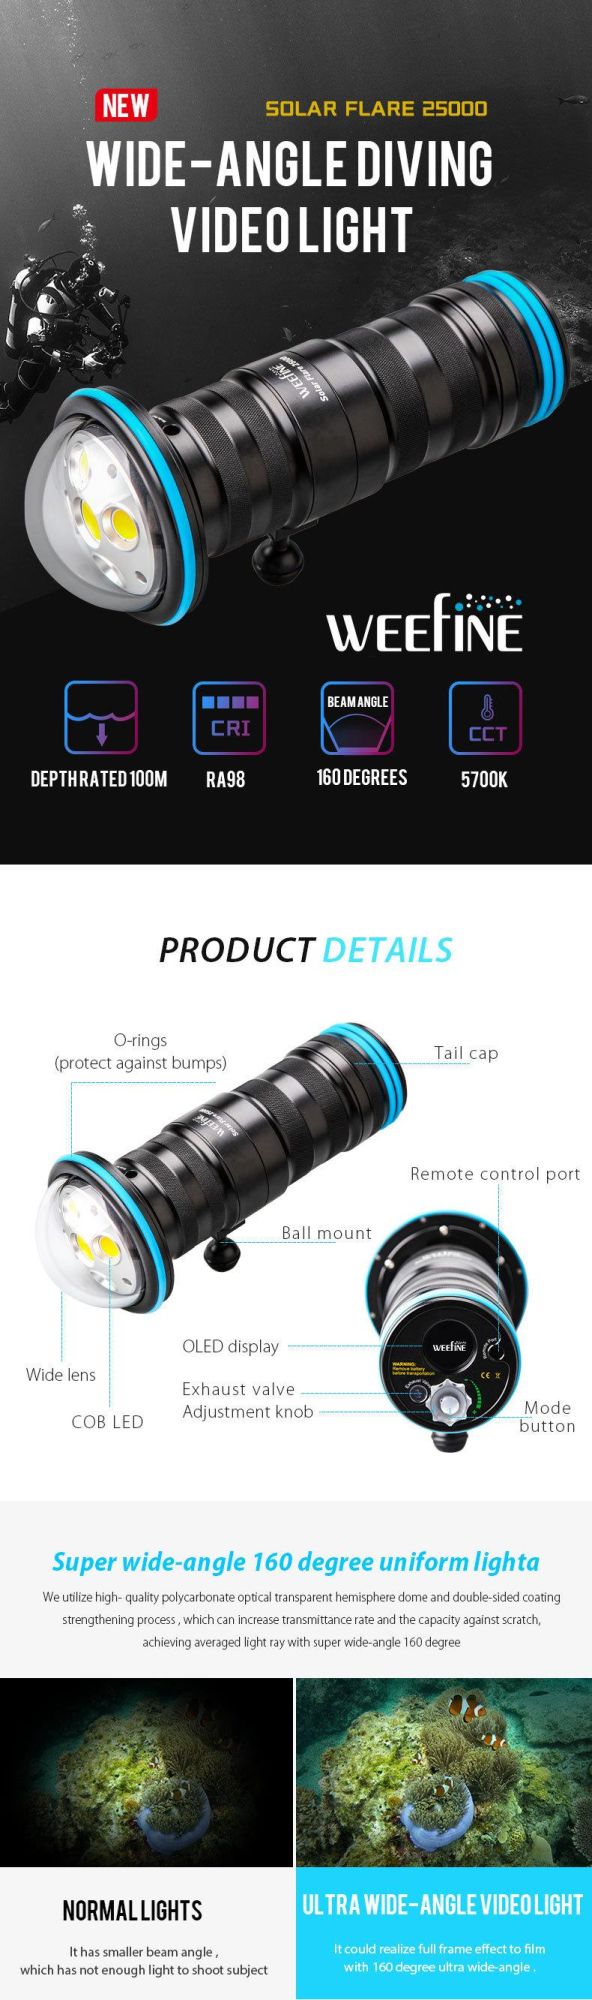 Super Bigger Beam Angle Professional Underwater Diving Photography Light with Multi-COB Light Source